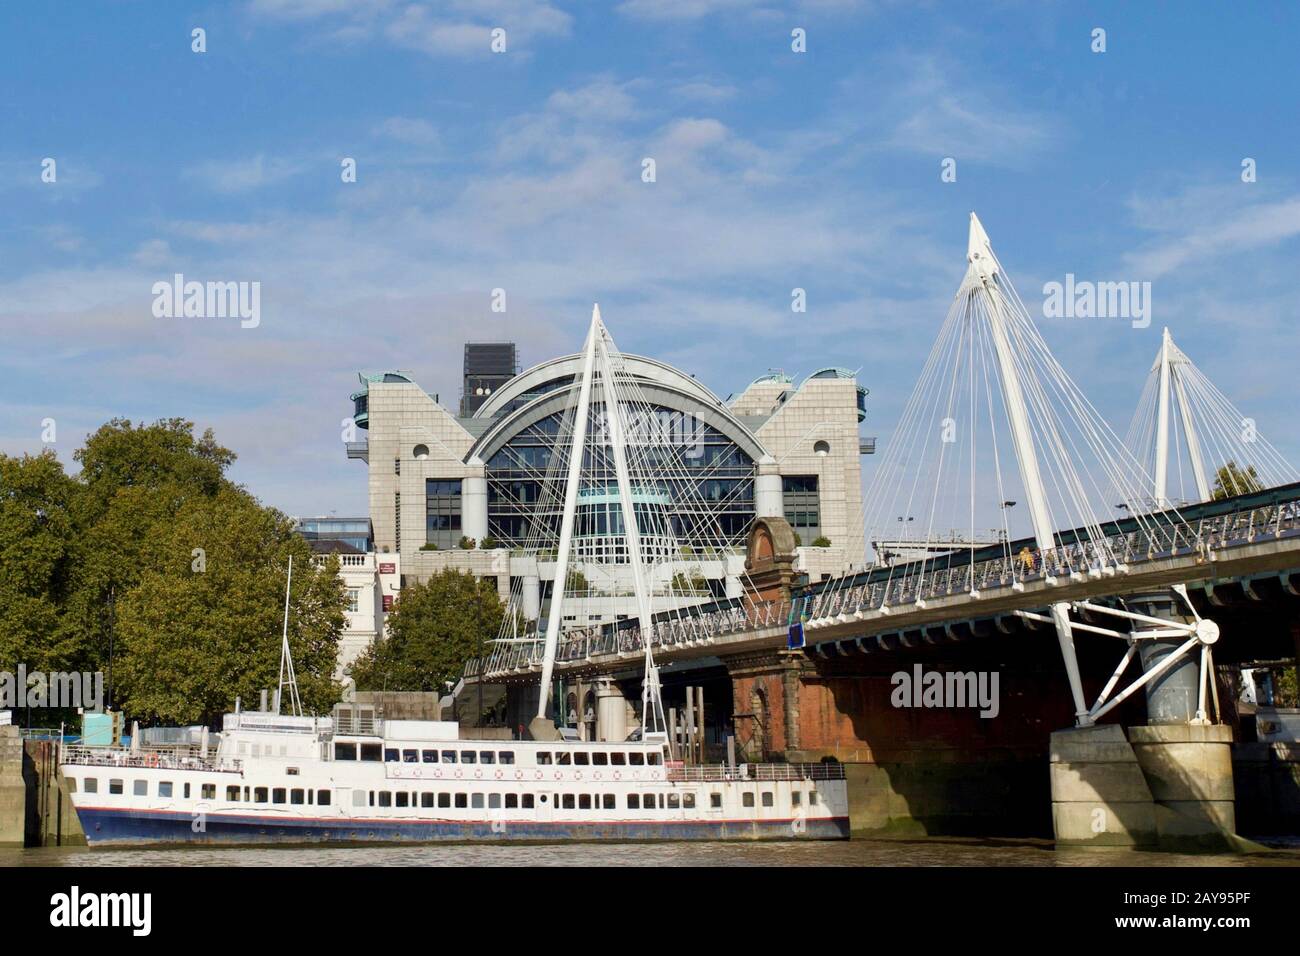 Hungerford & Golden Jubilee Bridges looking towards Charing Cross Station and Embankment Place, London, England. Stock Photo